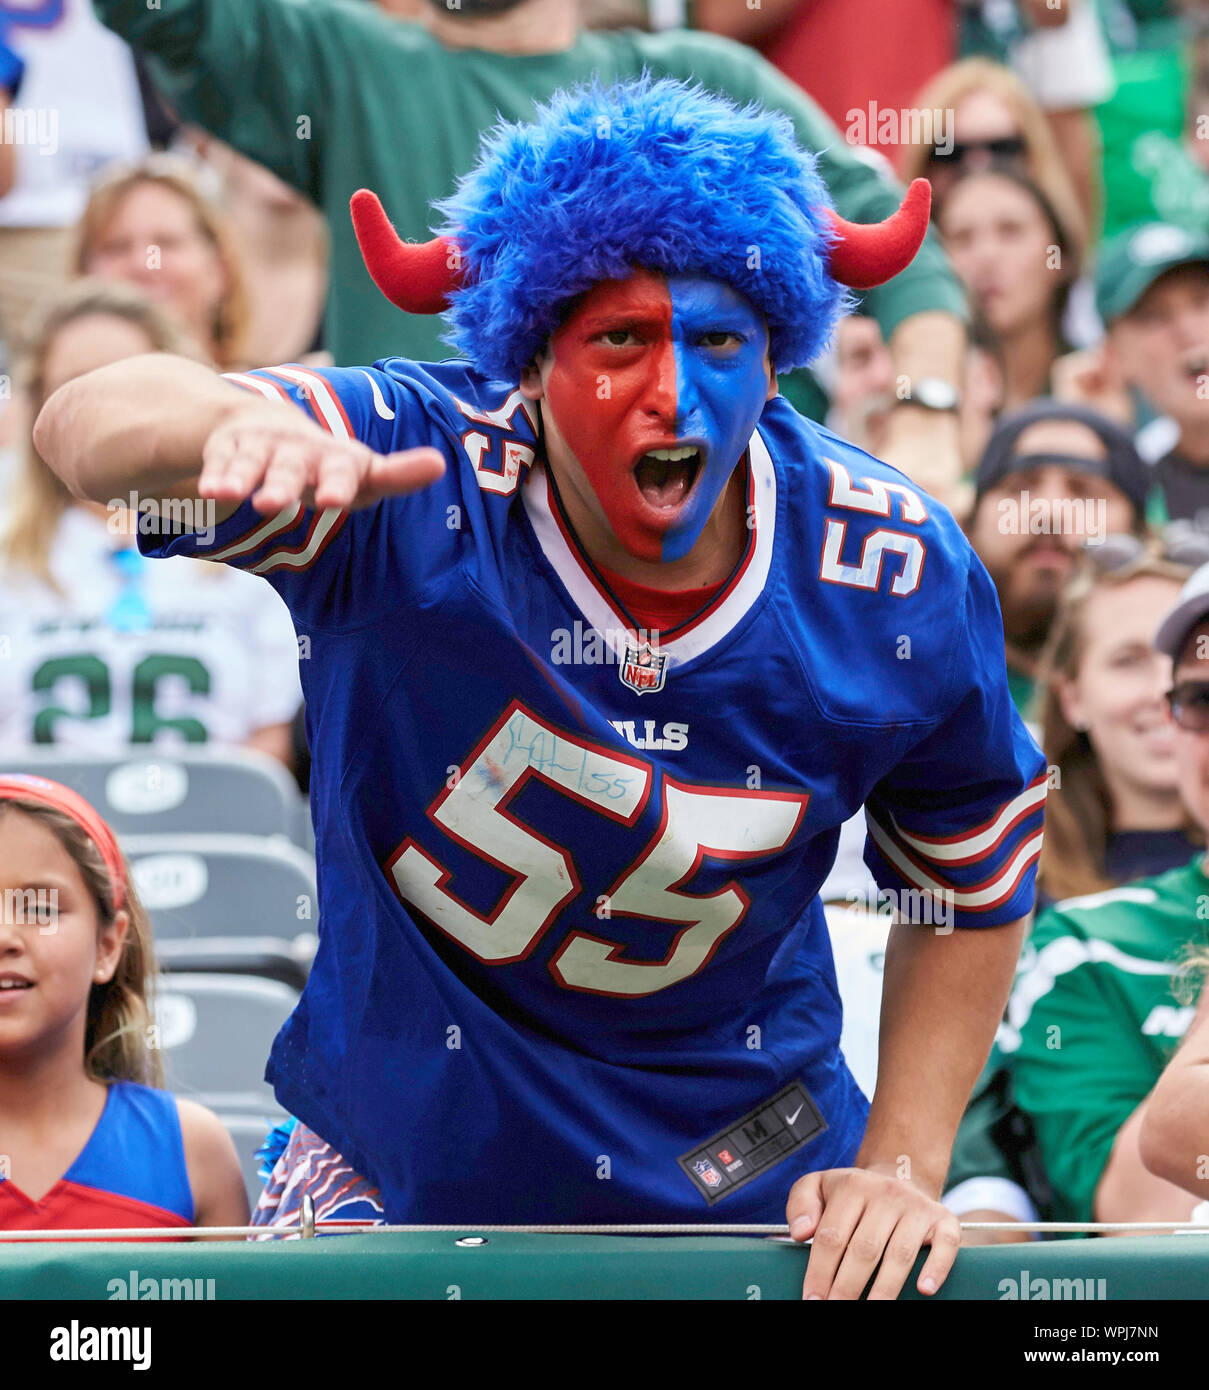 September 8, 2019, East Rutherford, New Jersey, USA: A Buffalo Bills fan  during a NFL game between the Buffalo Bills and the New York Jets at MetLife  Stadium in East Rutherford, New